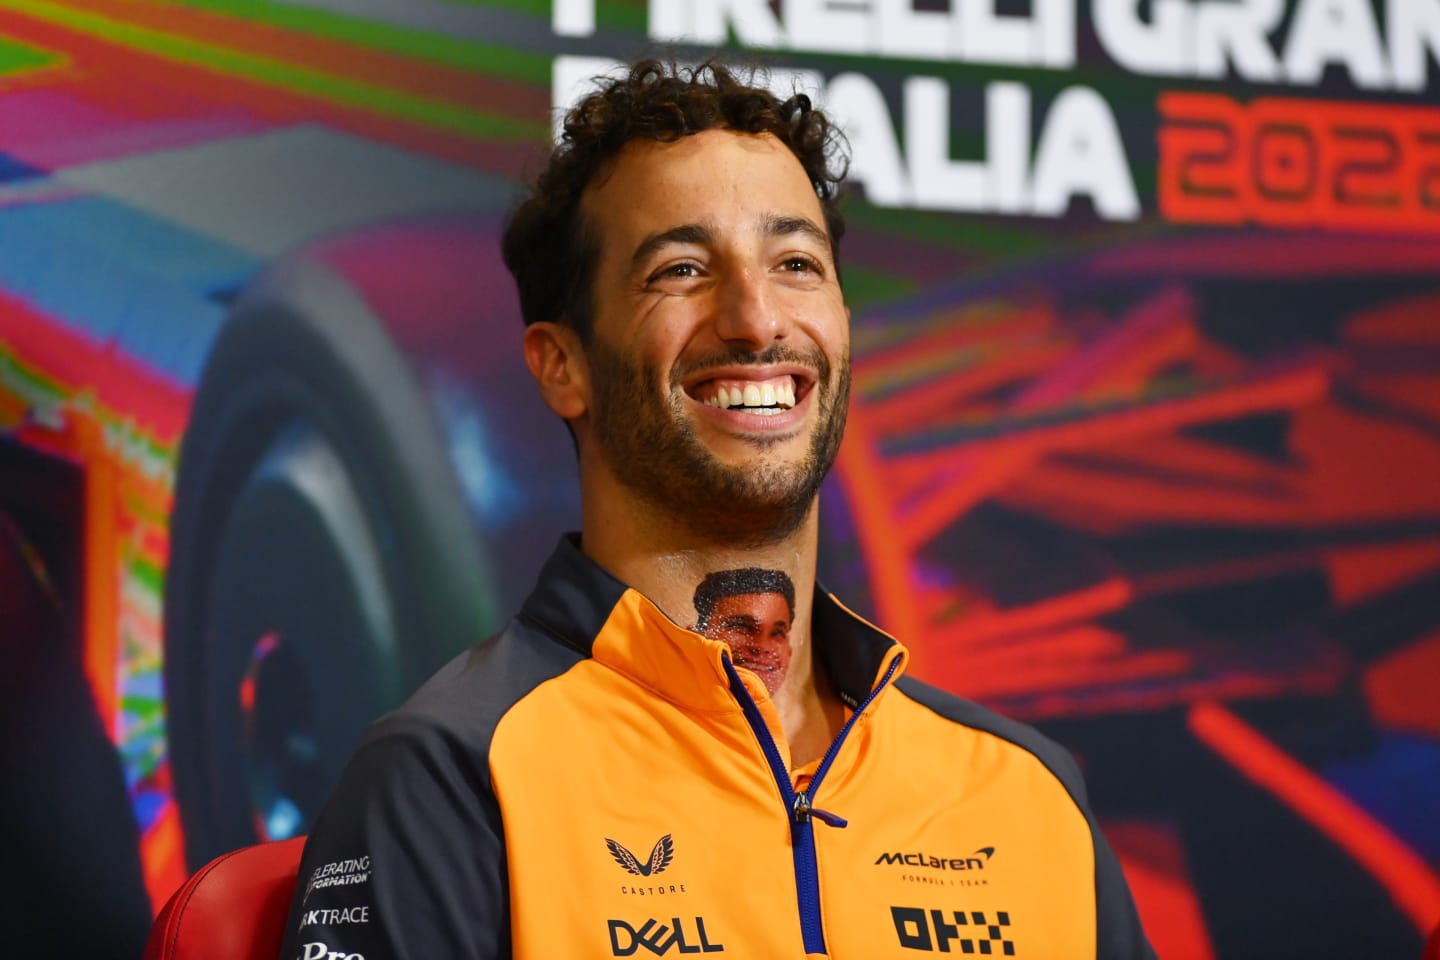 MONZA, ITALY - SEPTEMBER 08: Daniel Ricciardo of Australia and McLaren attends the Drivers Press Conference during previews ahead of the F1 Grand Prix of Italy at Autodromo Nazionale Monza on September 08, 2022 in Monza, Italy. (Photo by Dan Mullan/Getty Images)